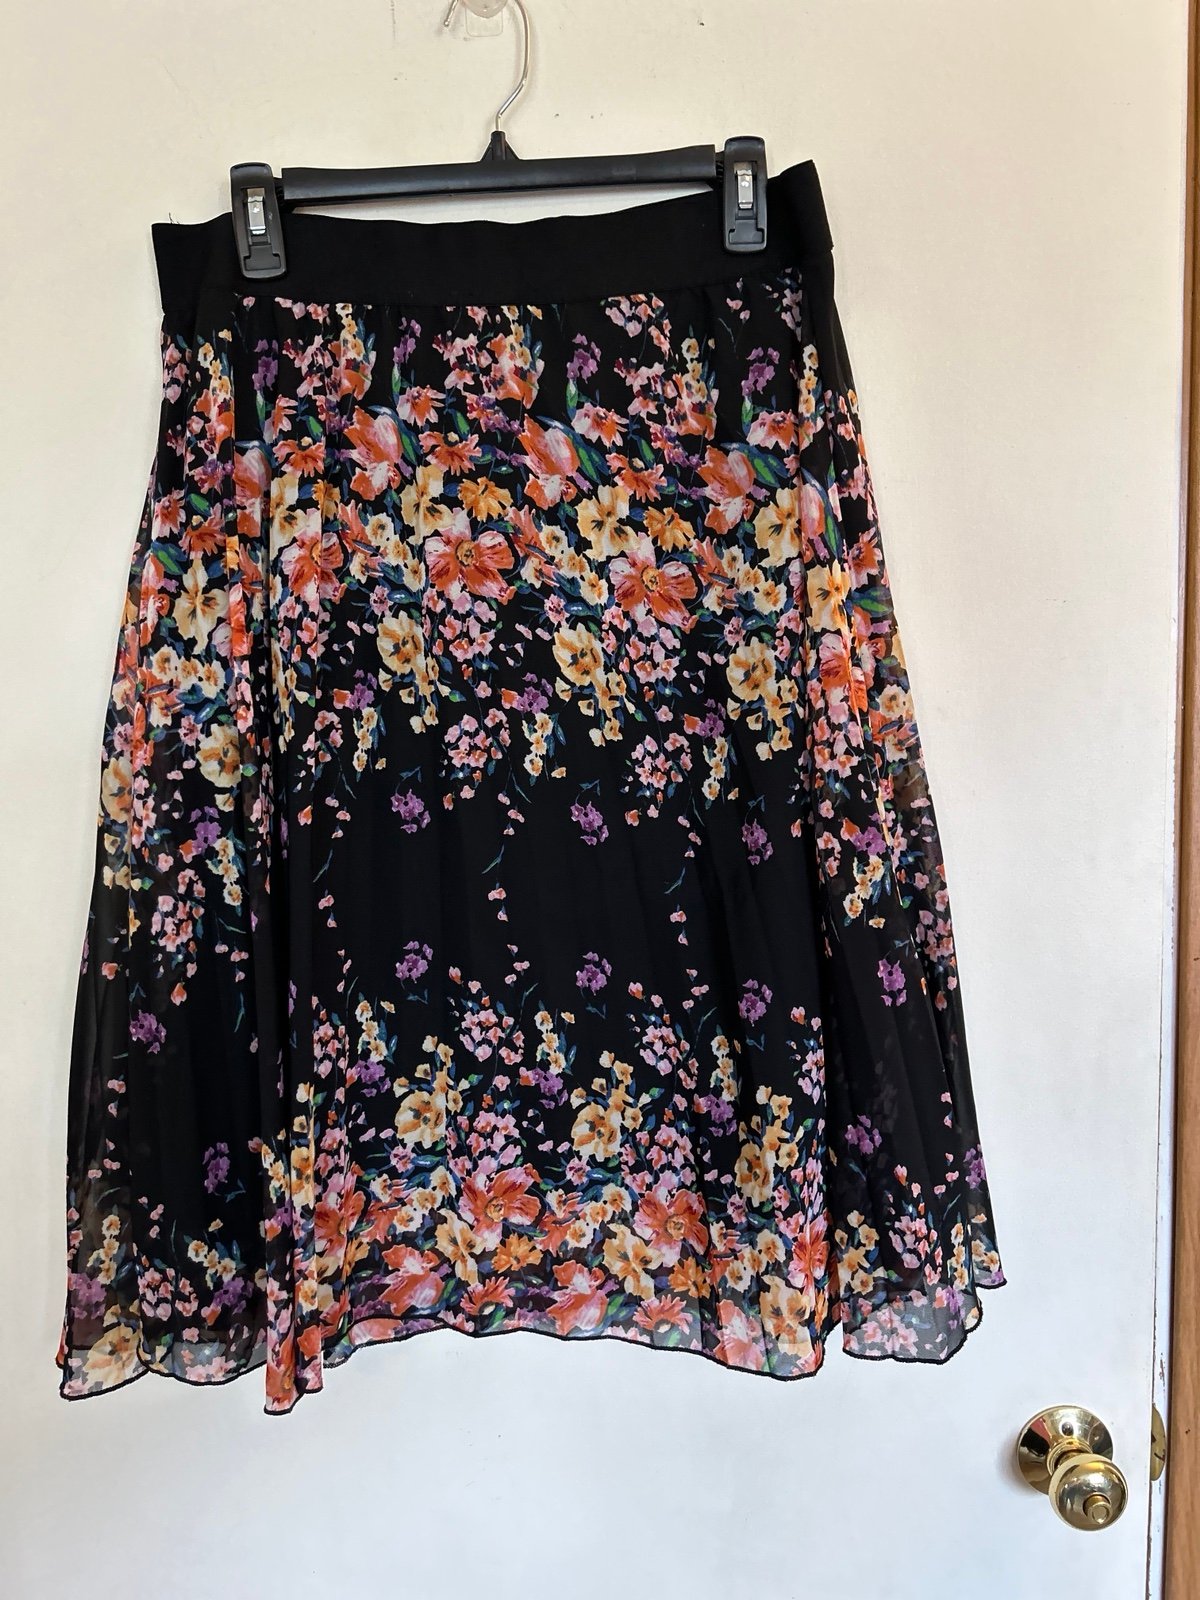 Elegant Compagnie Nouvelle Skirts Floral Pleated Skirt 